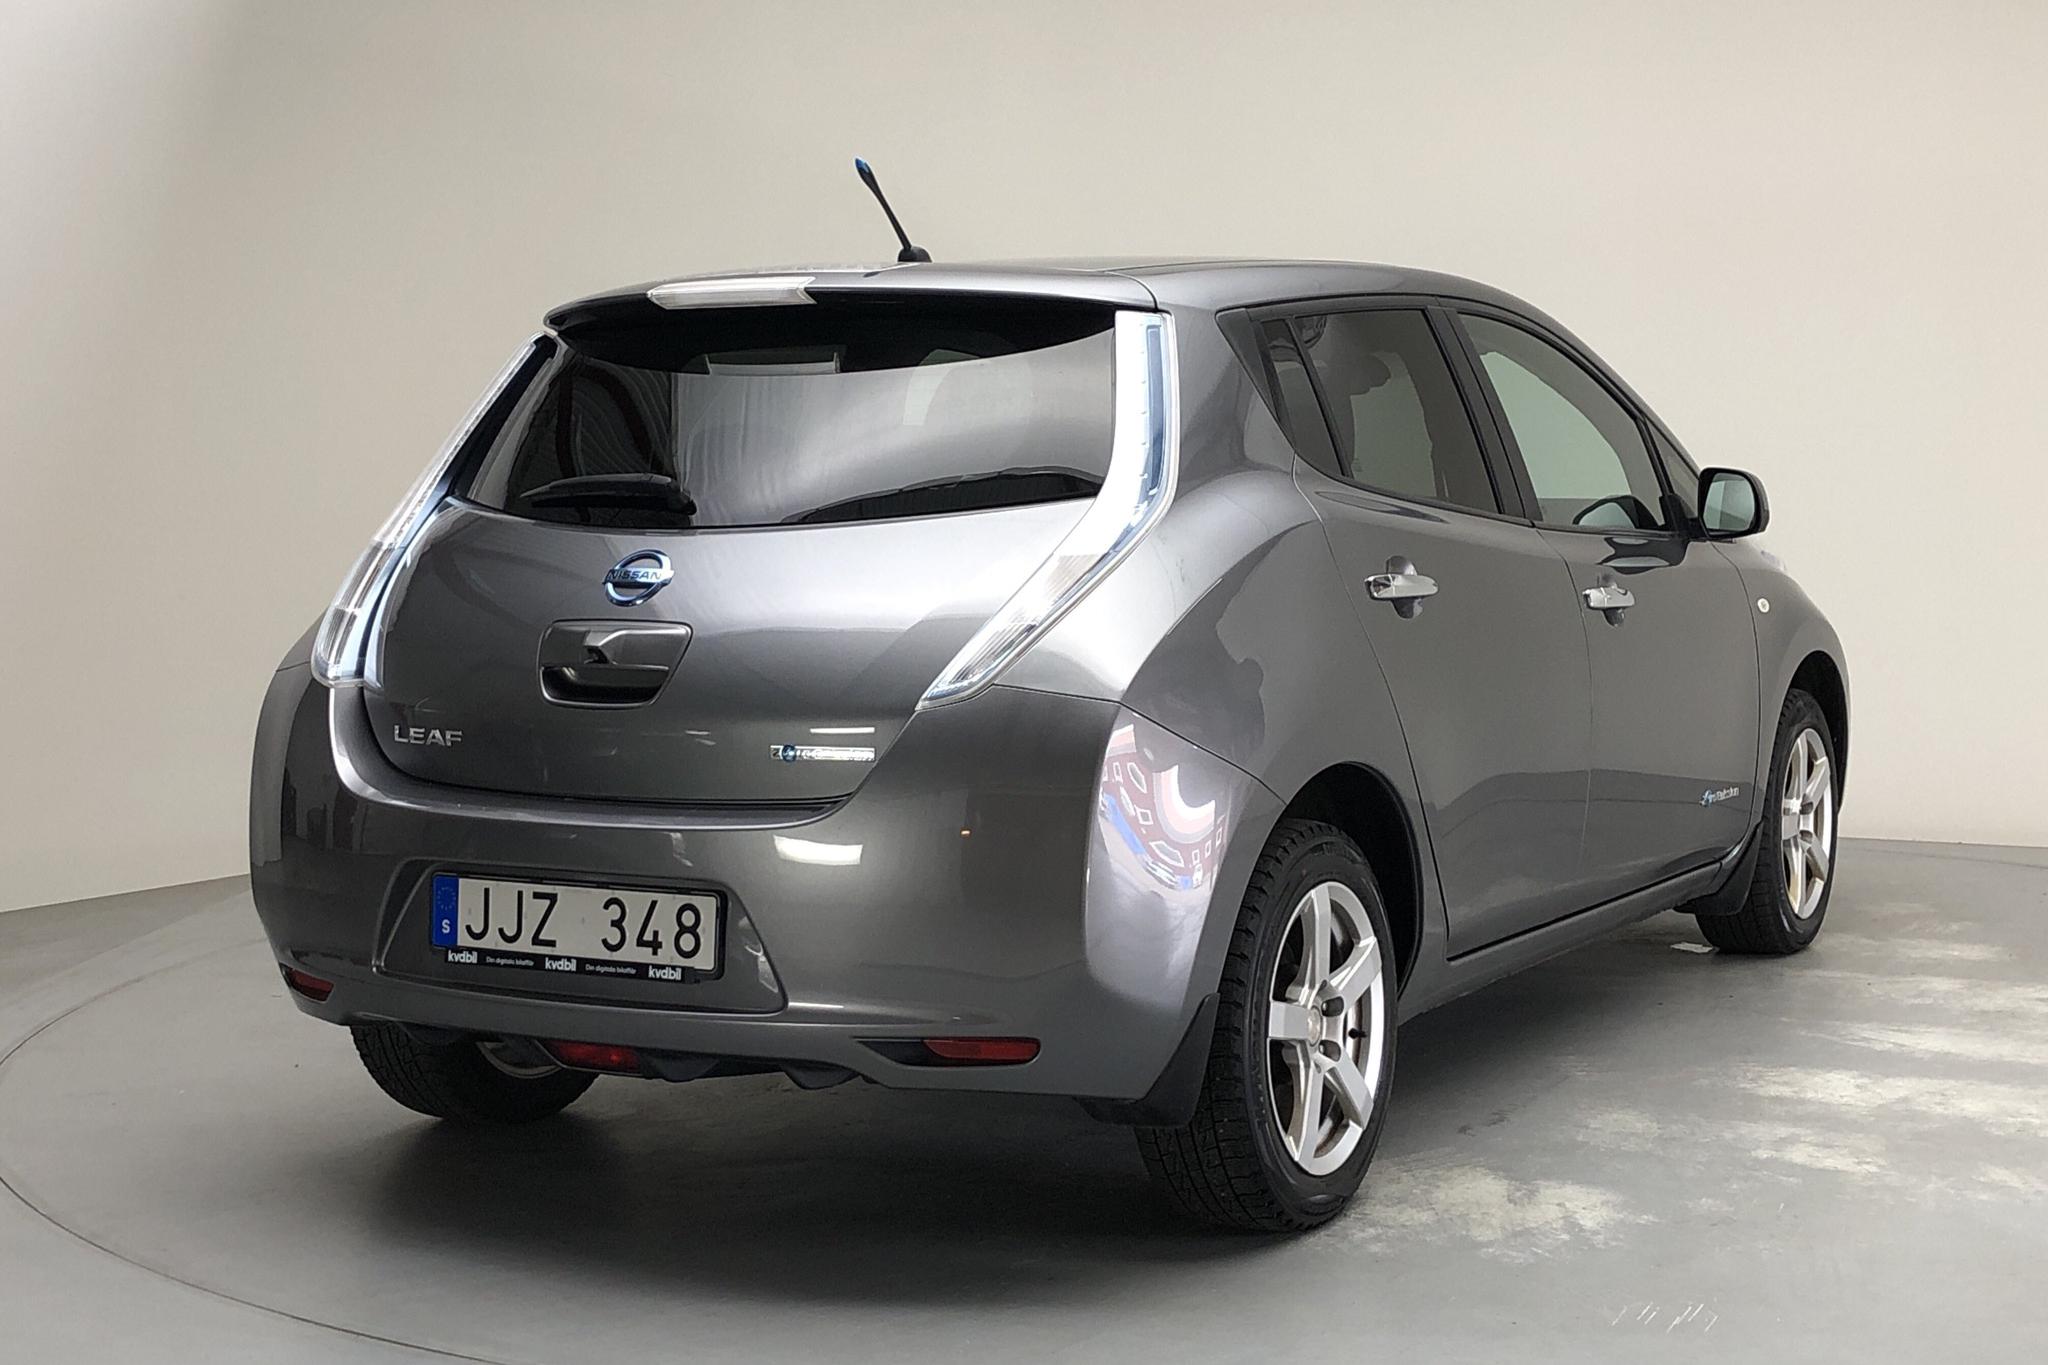 Nissan LEAF 5dr 24 kWh (109hk) - 149 390 km - Automatic - gray - 2014